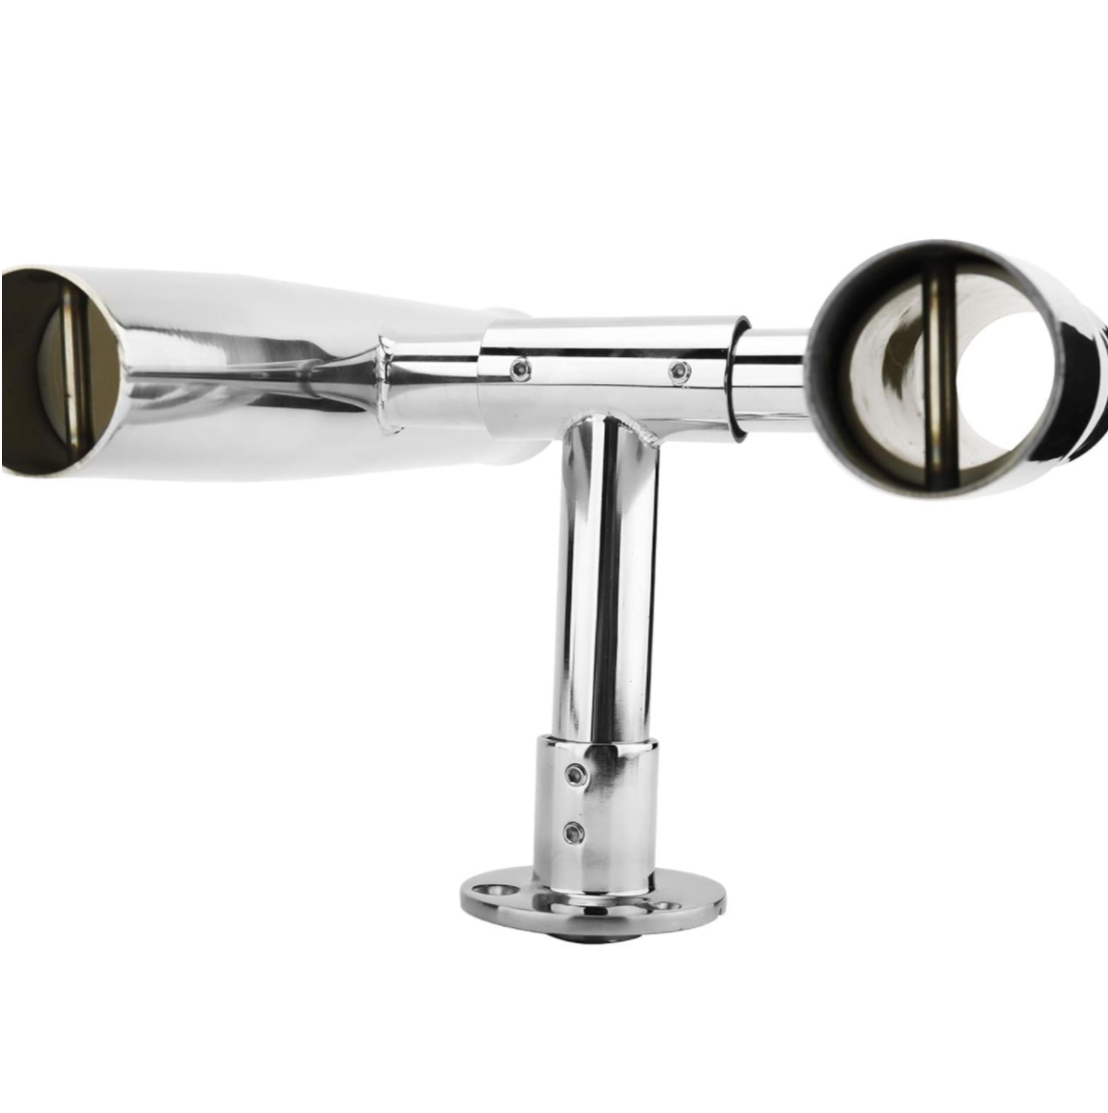 YaeMarine 5 Tube Adjustable Stainless Rod Holders Can Be Rotated 360 Degrees for Boat, Yacht